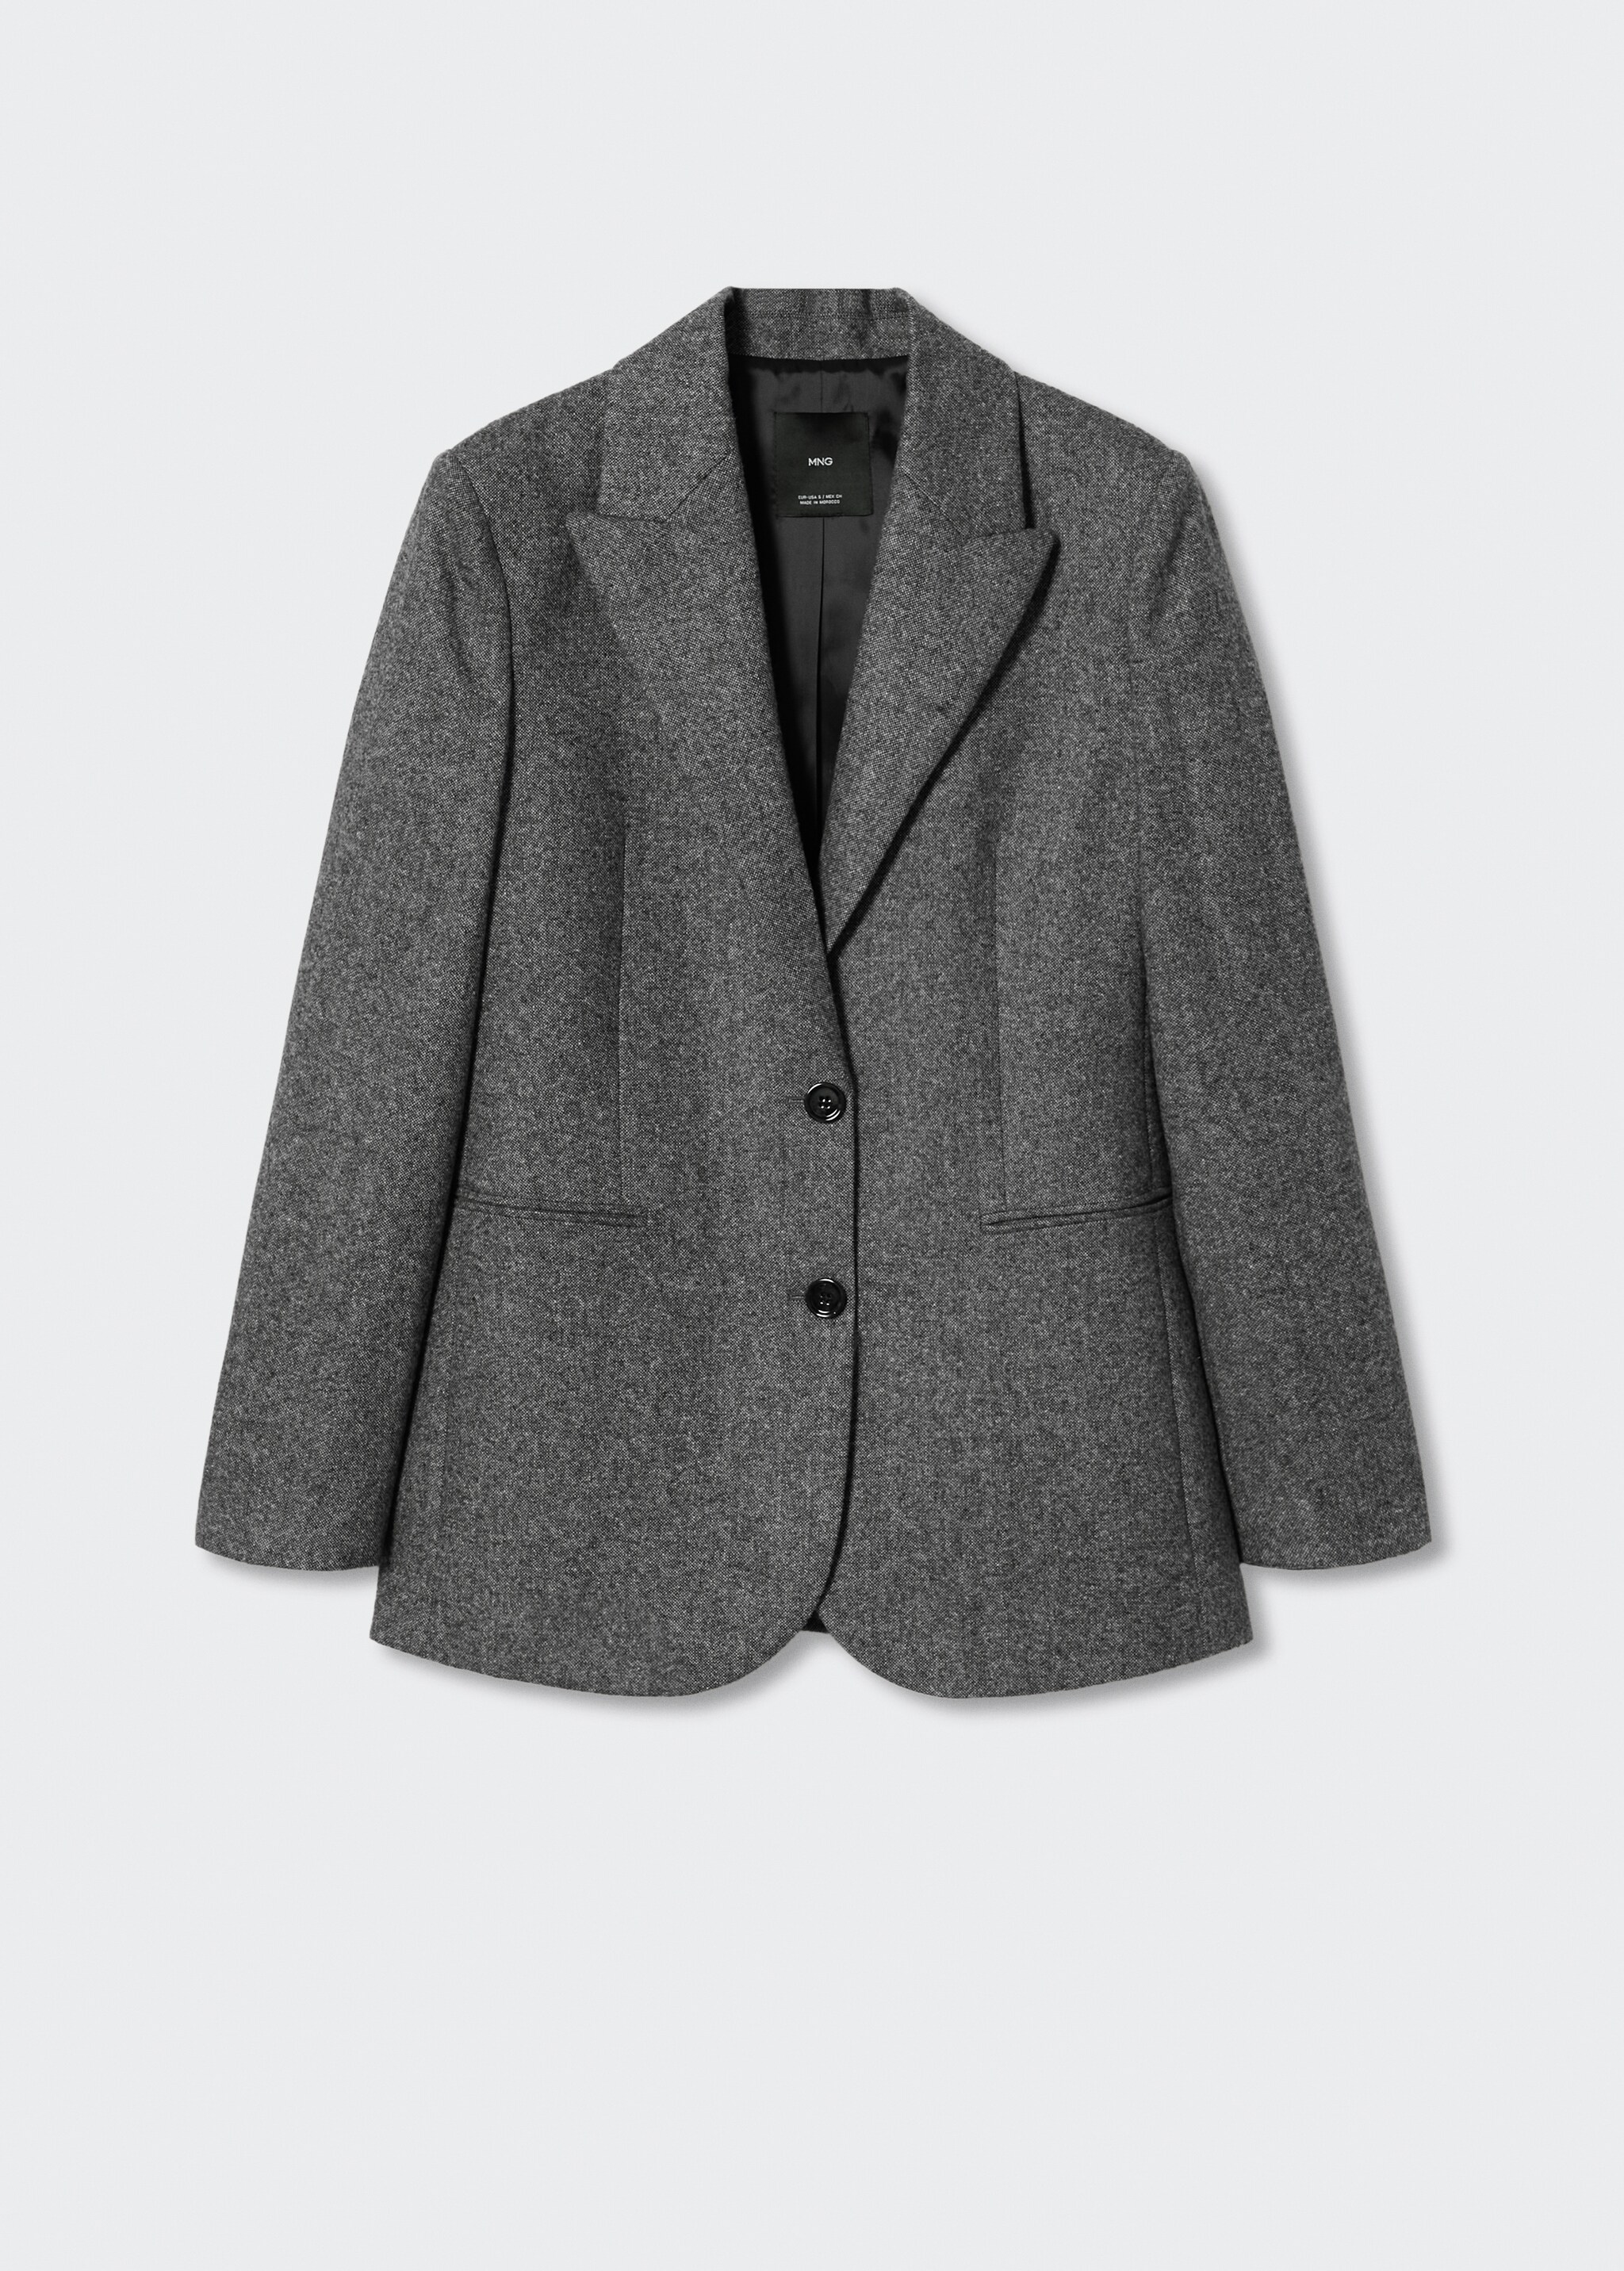 Wool suit blazer - Article without model